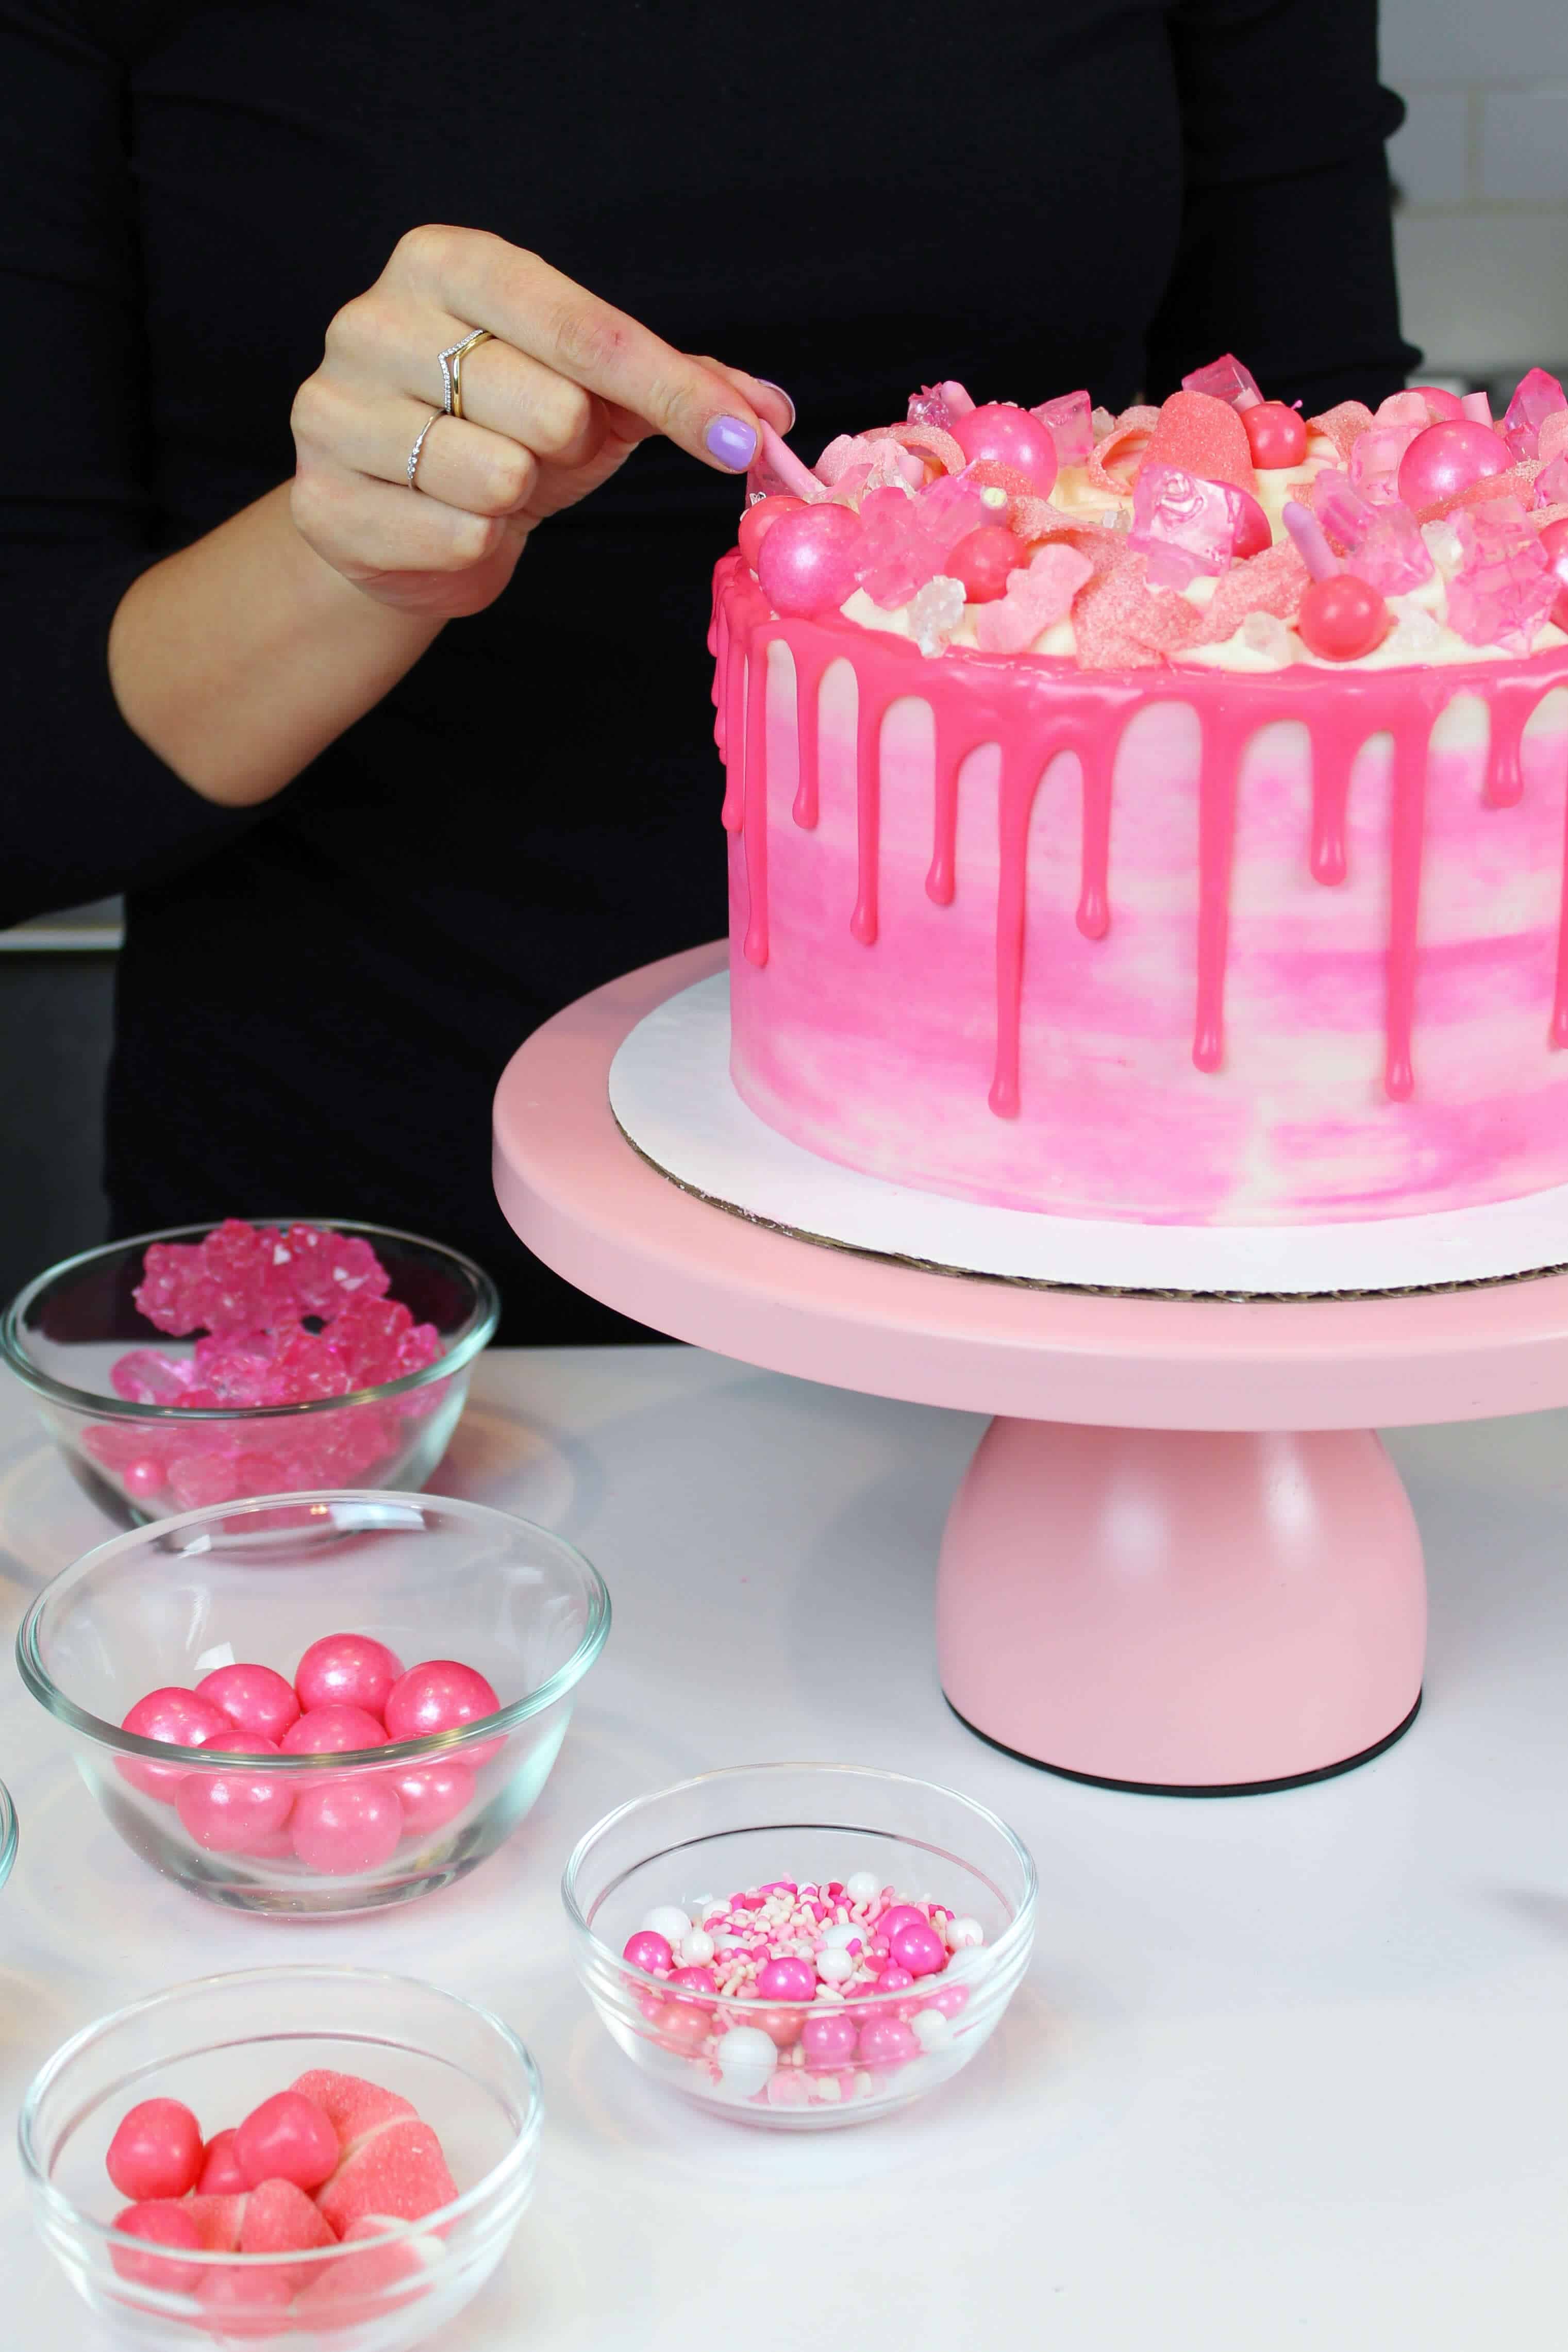 Pictures of PINk Drip Cake